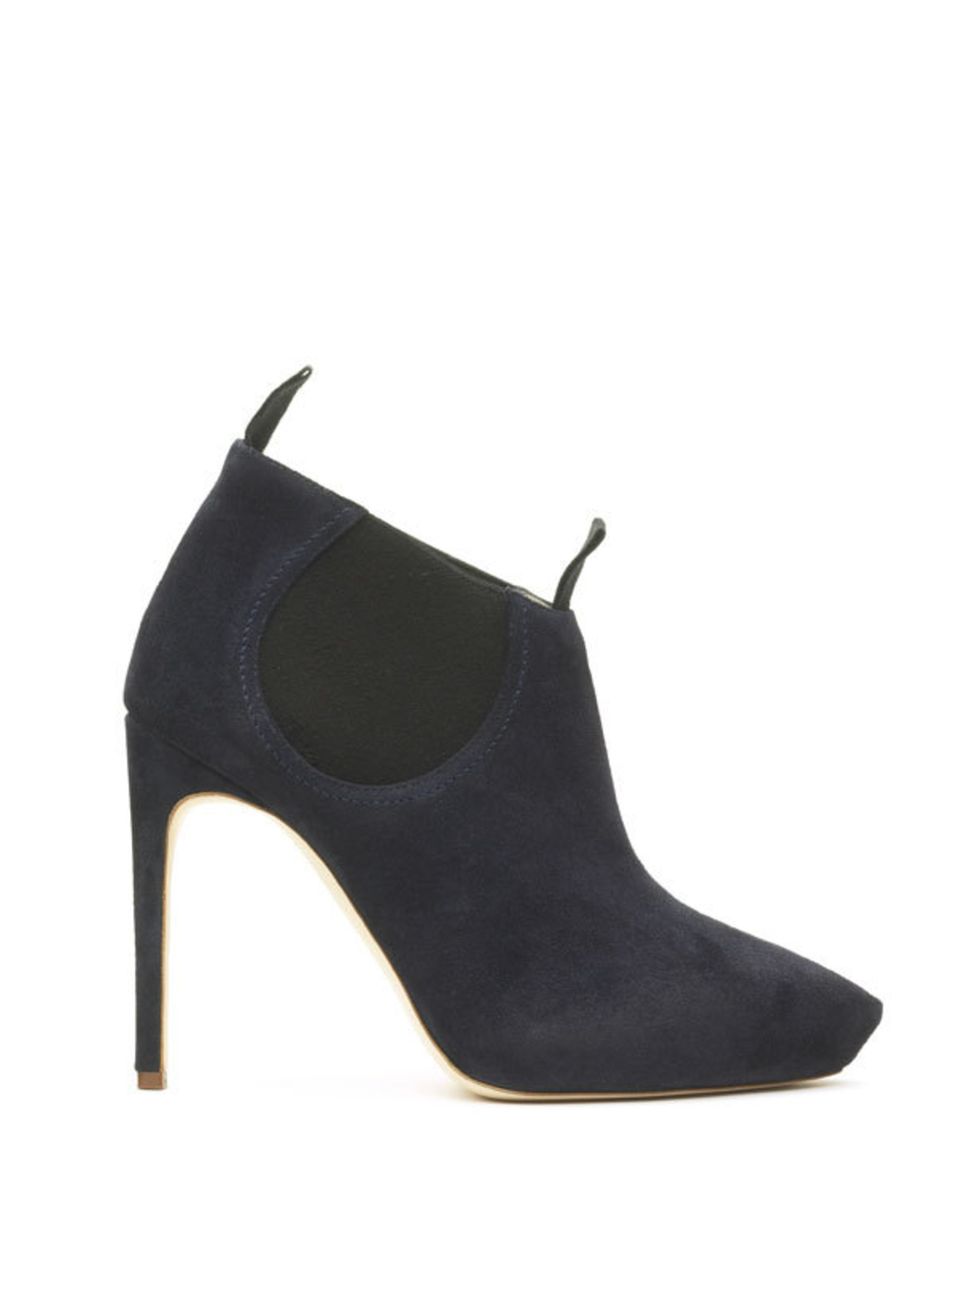 <p>Rupert Sanderson suede Chelsea boots, £625, for stockists call 020 7491 2220</p>